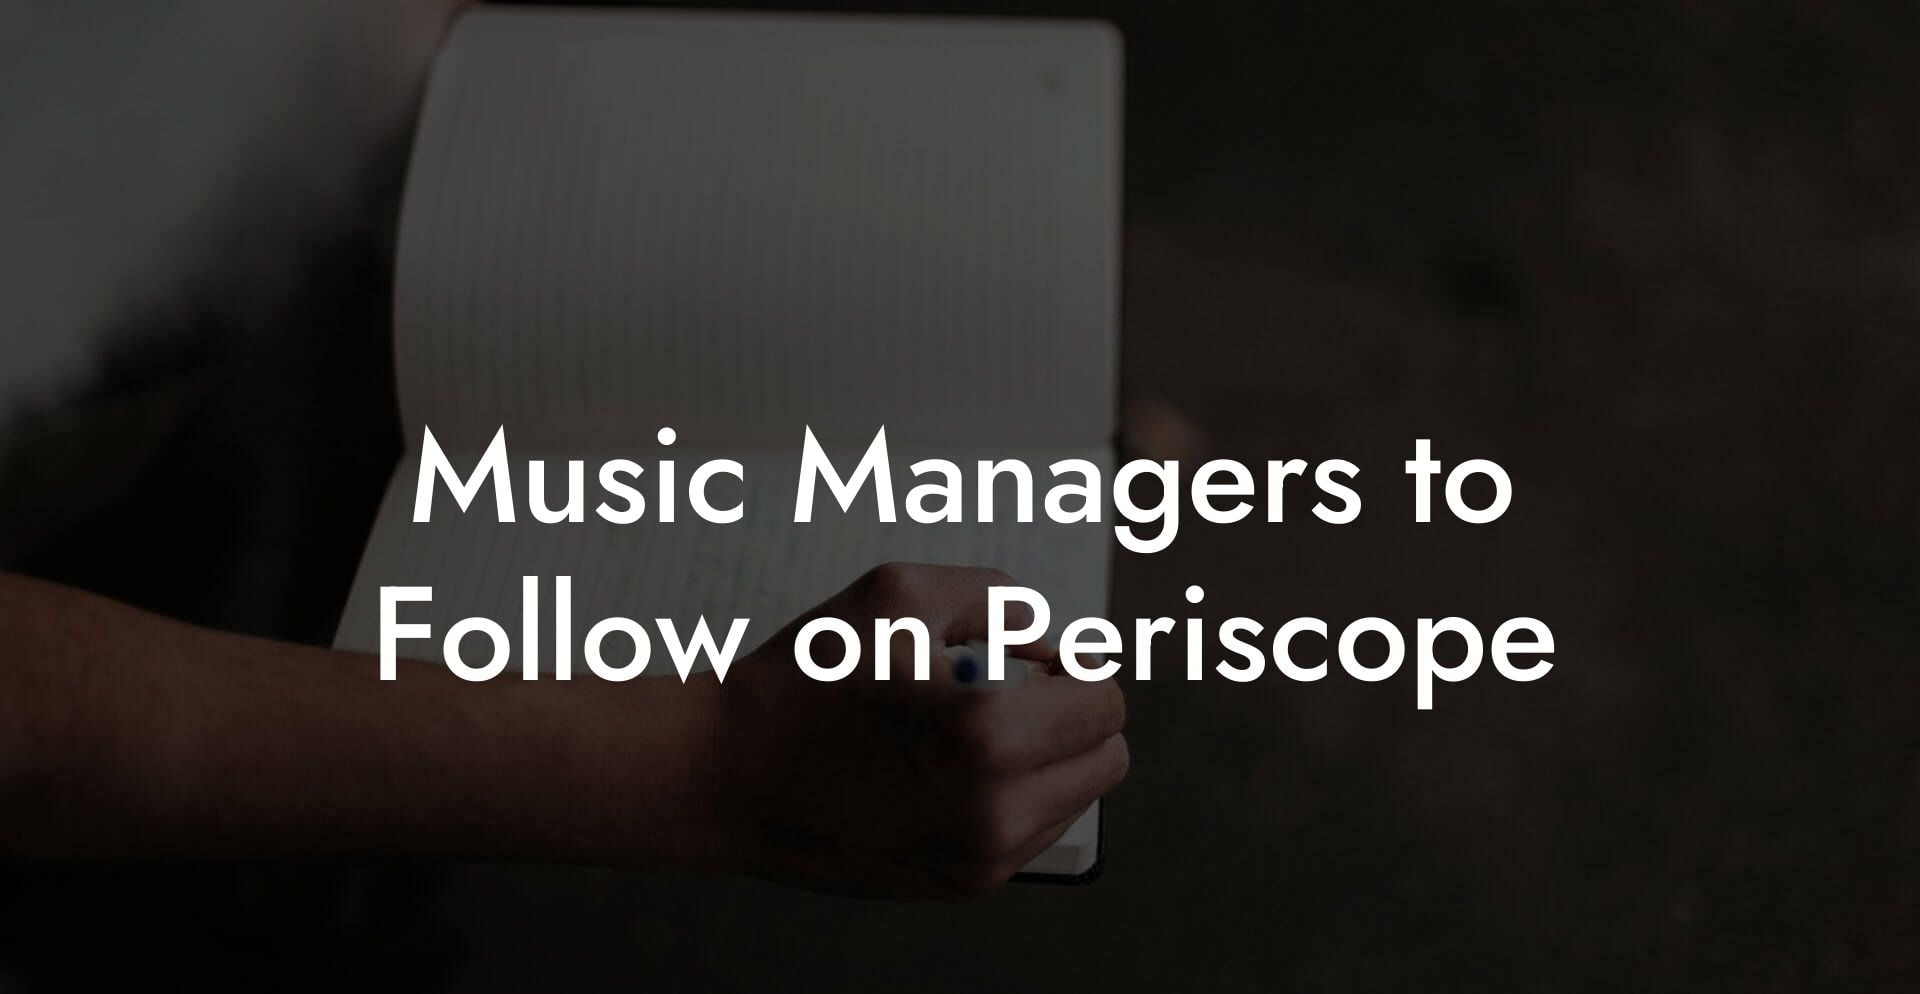 Music Managers to Follow on Periscope